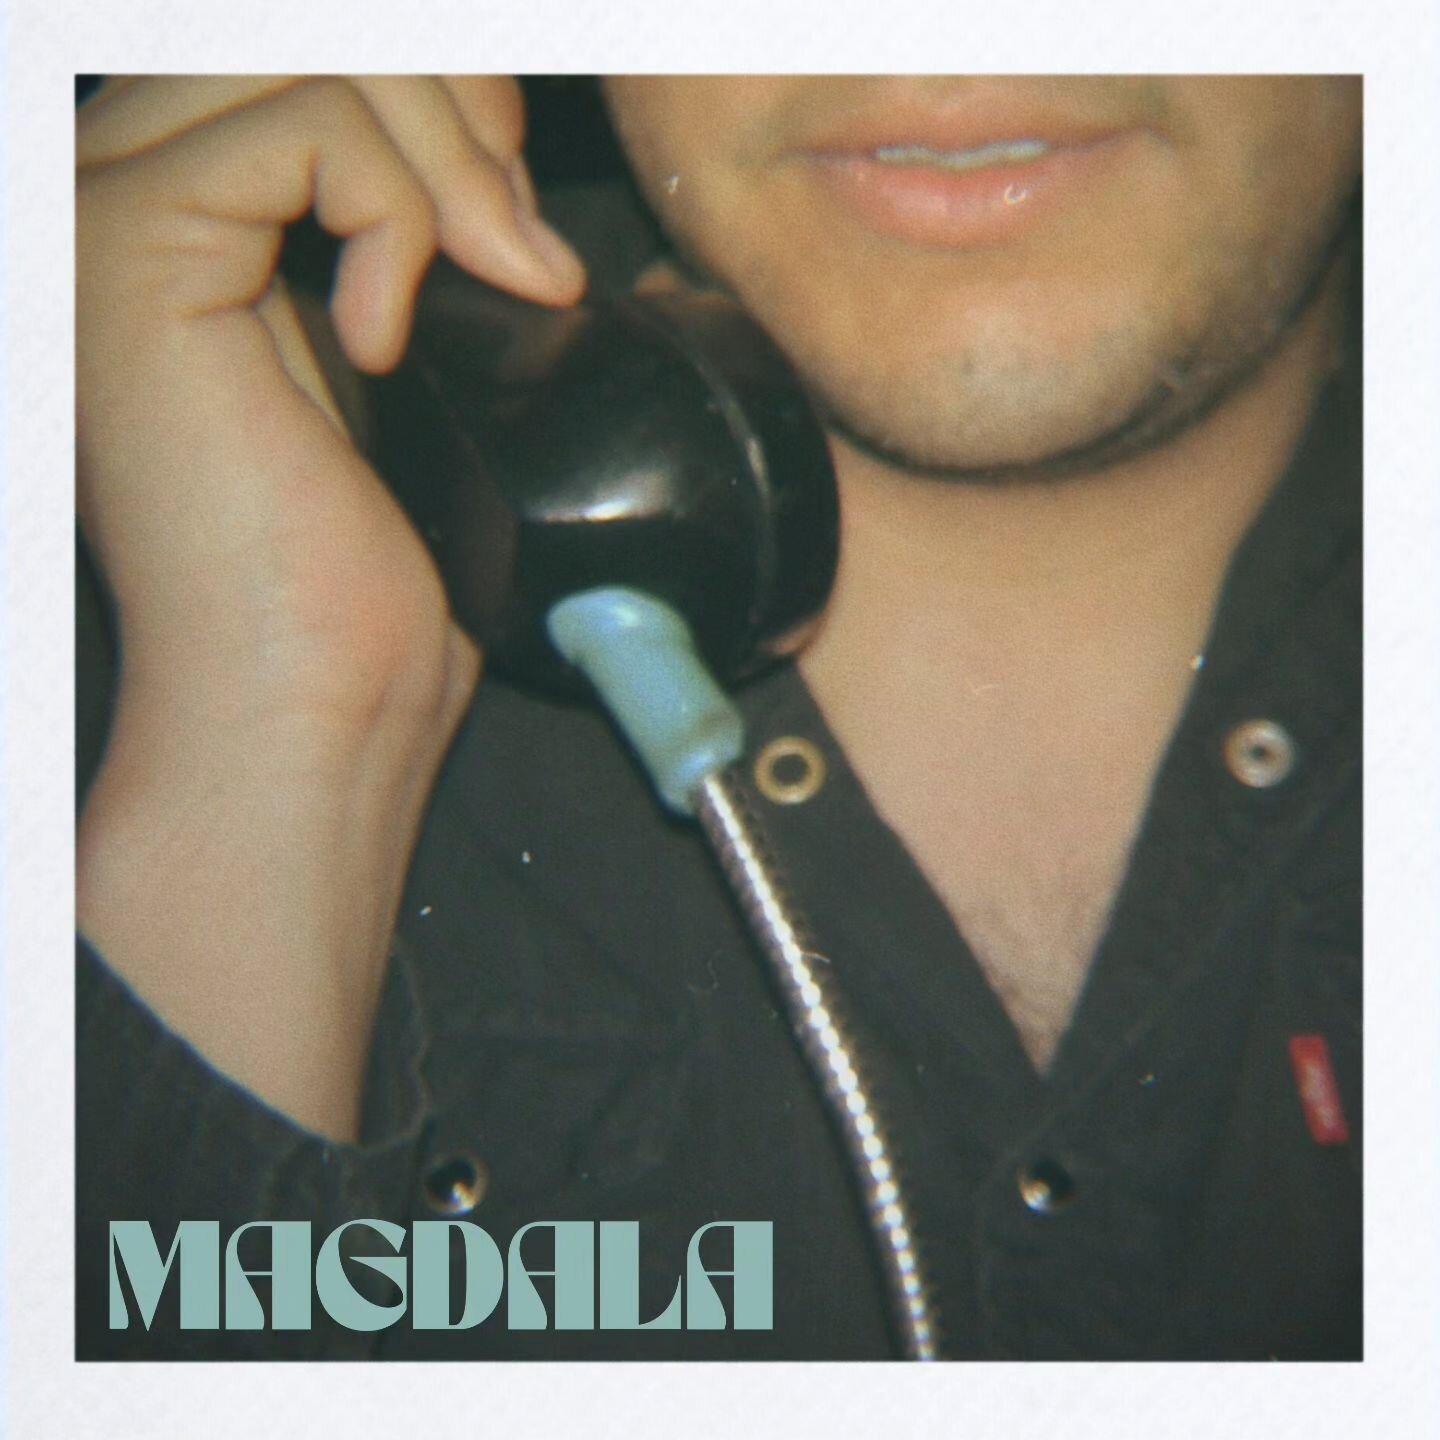 in case you missed it, our newest track &quot;magdala&quot; is out and about on all streaming services. hope you enjoy it.

thanks to the indie blog world for some thoughtful words: @lastdaydeaf @americanrobb @oleada.indie 🖤